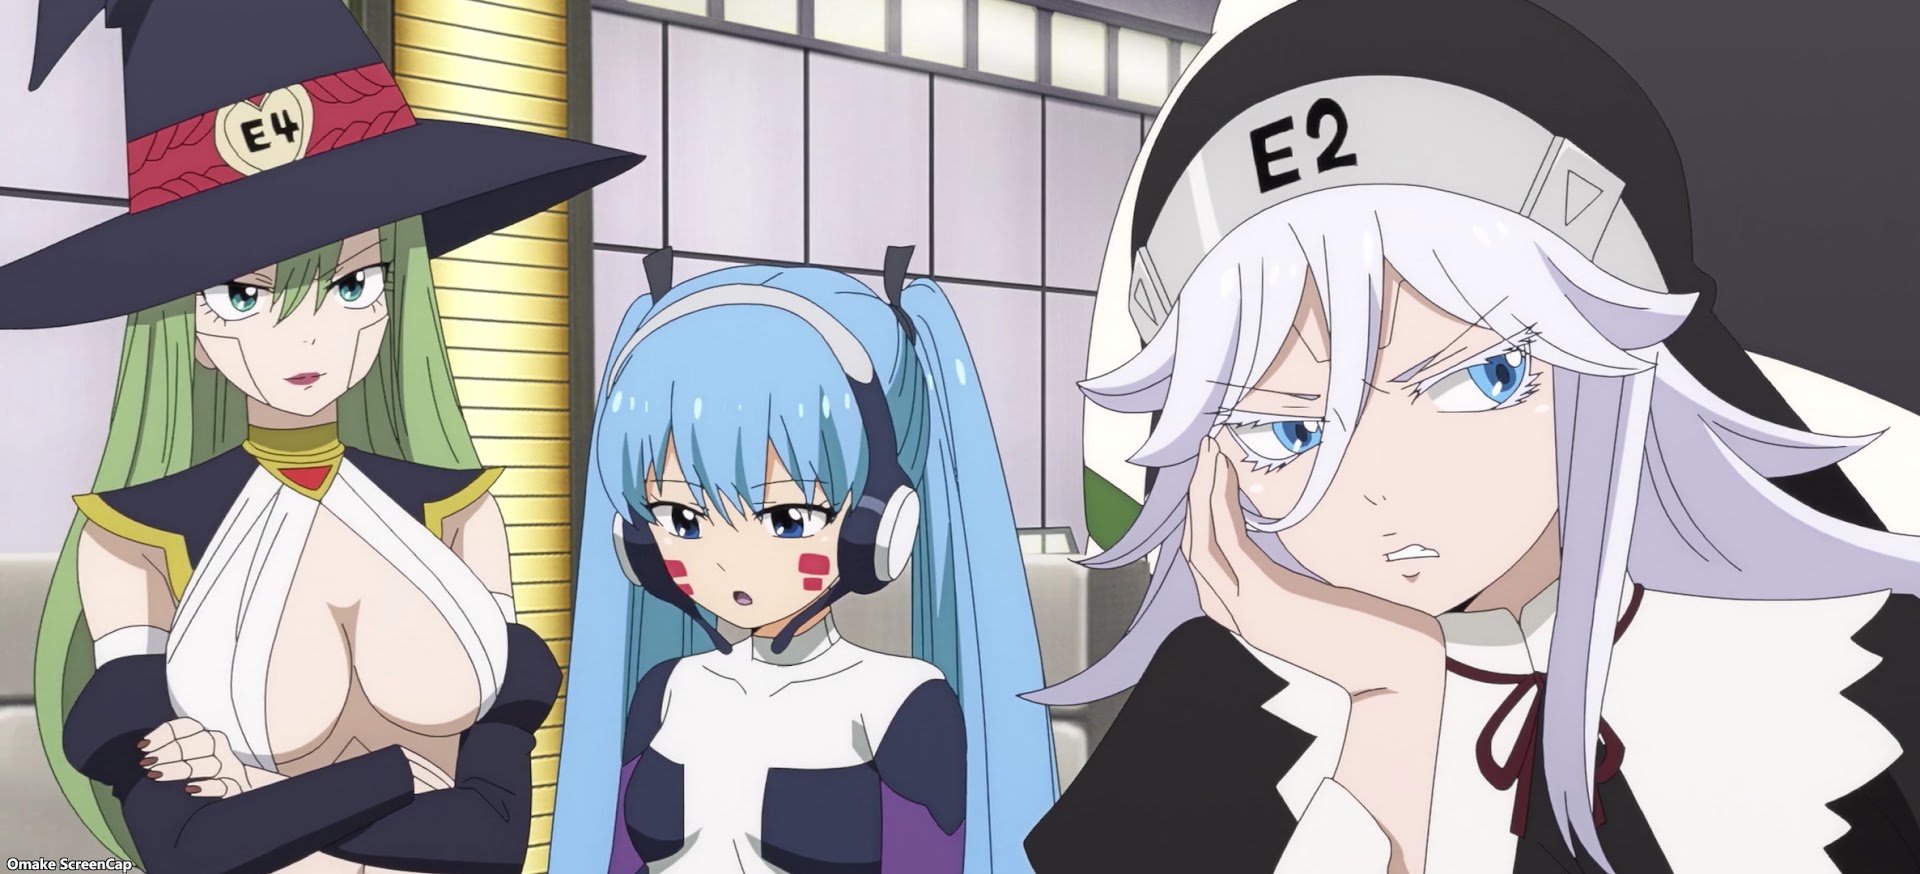 Edens Zero Season 2 Episode 19 Preview Images and Staff Revealed